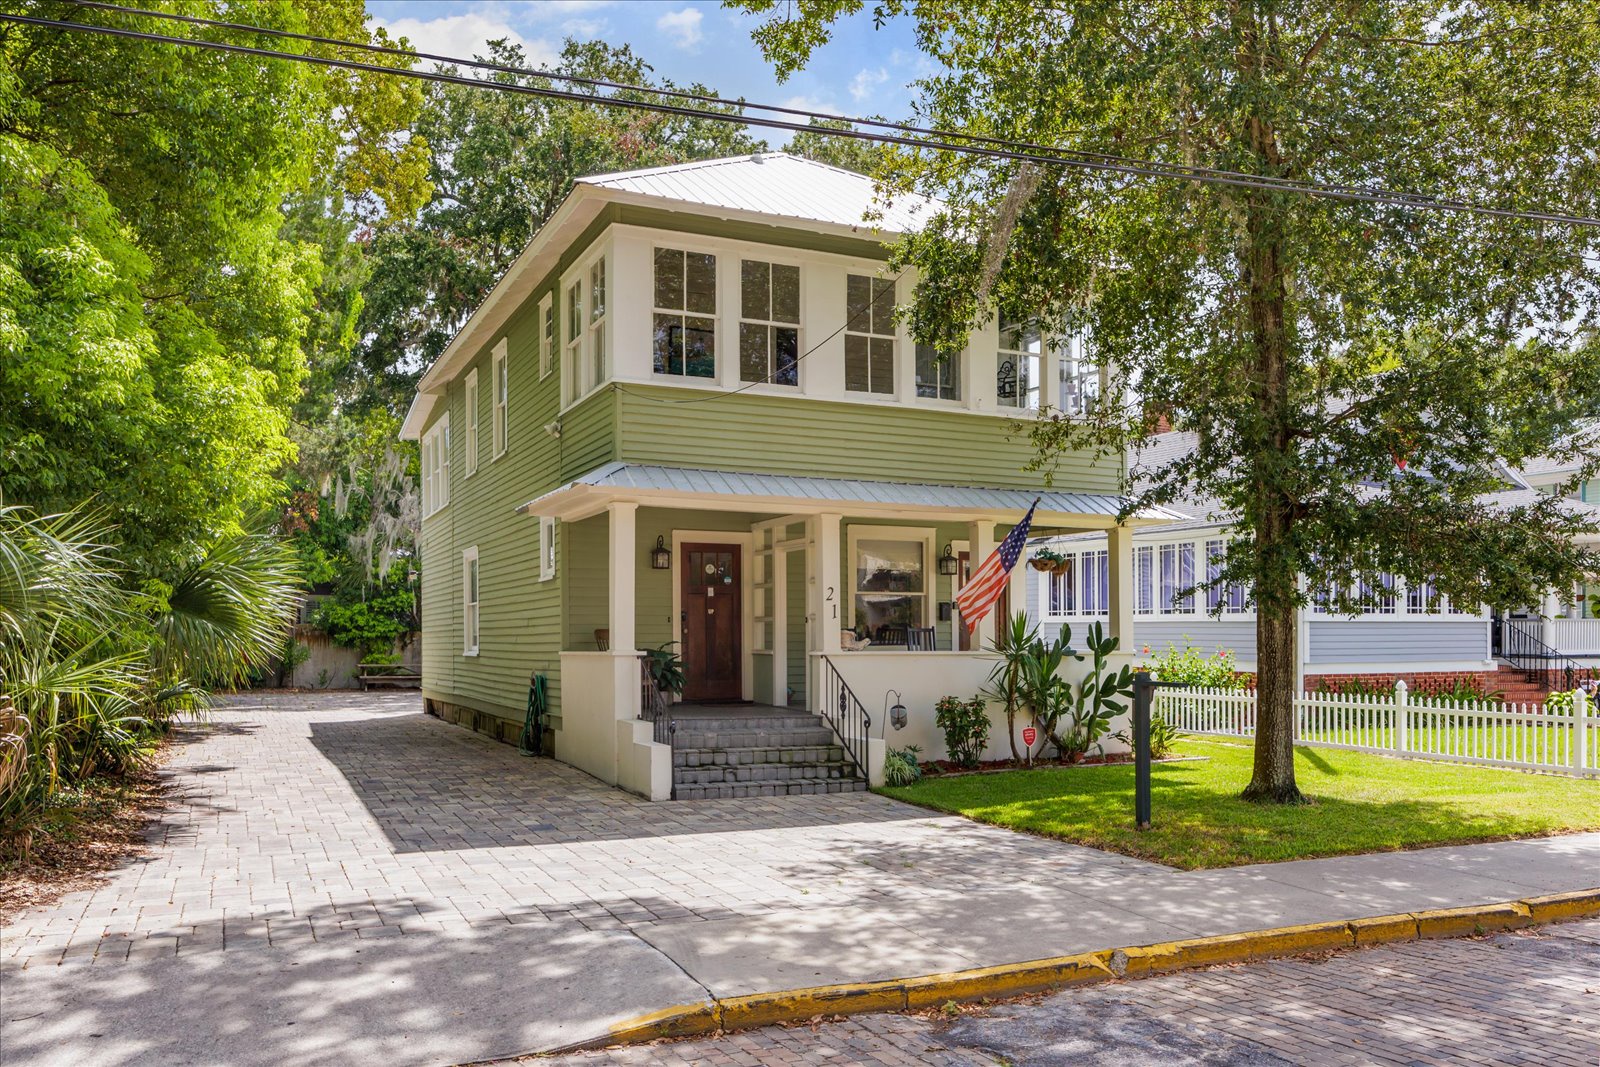 This gorgeous St. Augustine duplex offers driveway parking for 2 vehicles